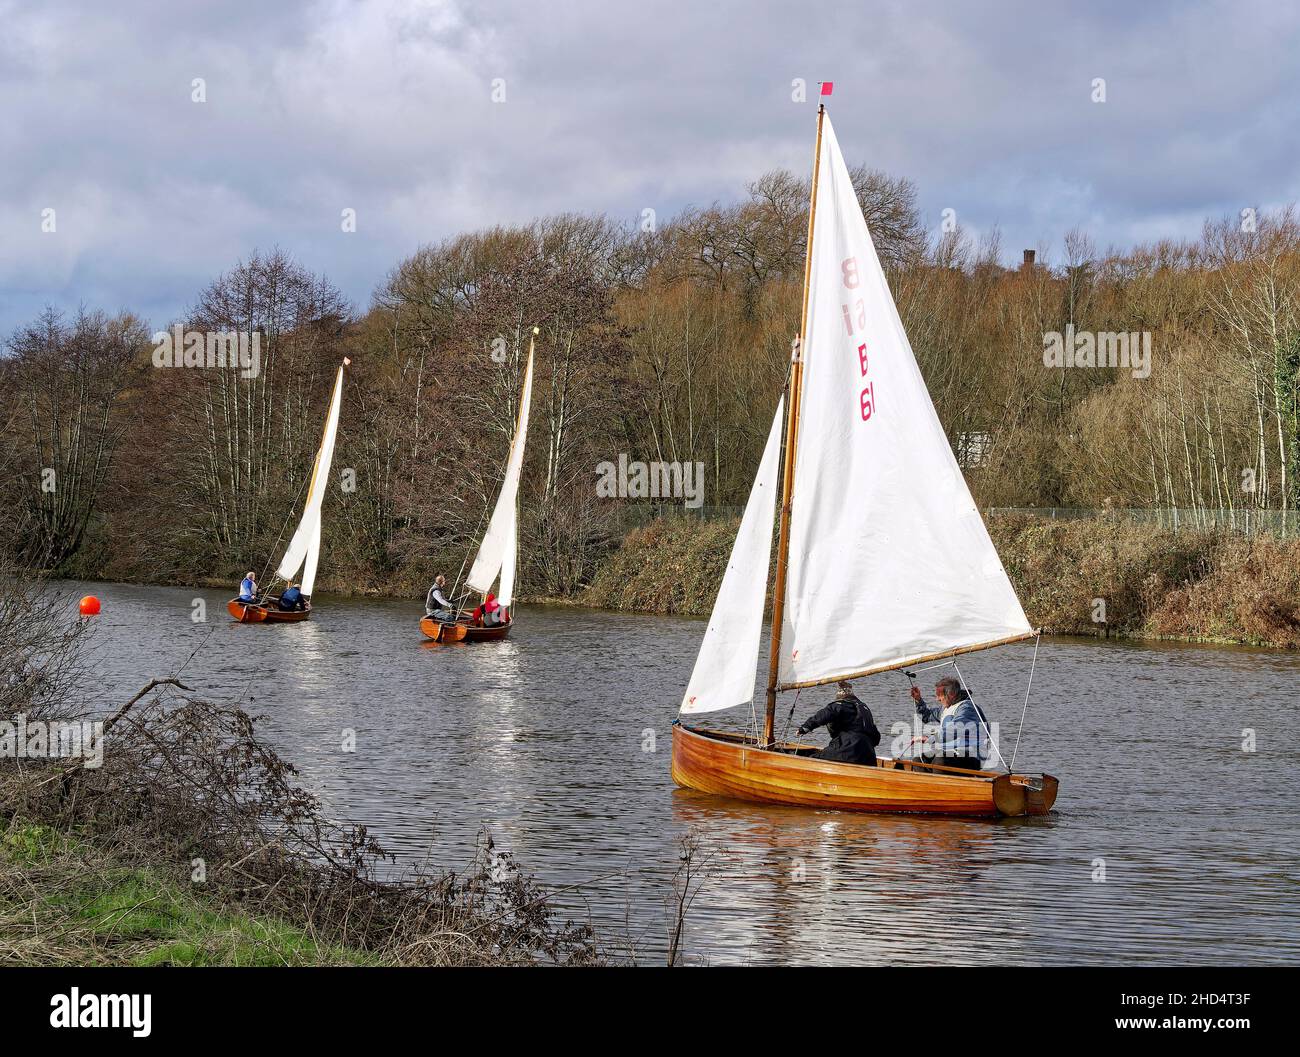 Norfolk 14 foot One Design sailing dinghy, a classic sailboat from1931 with a mahogany clinker built hull and gunter rig seen on River Yare Norwich. Stock Photo